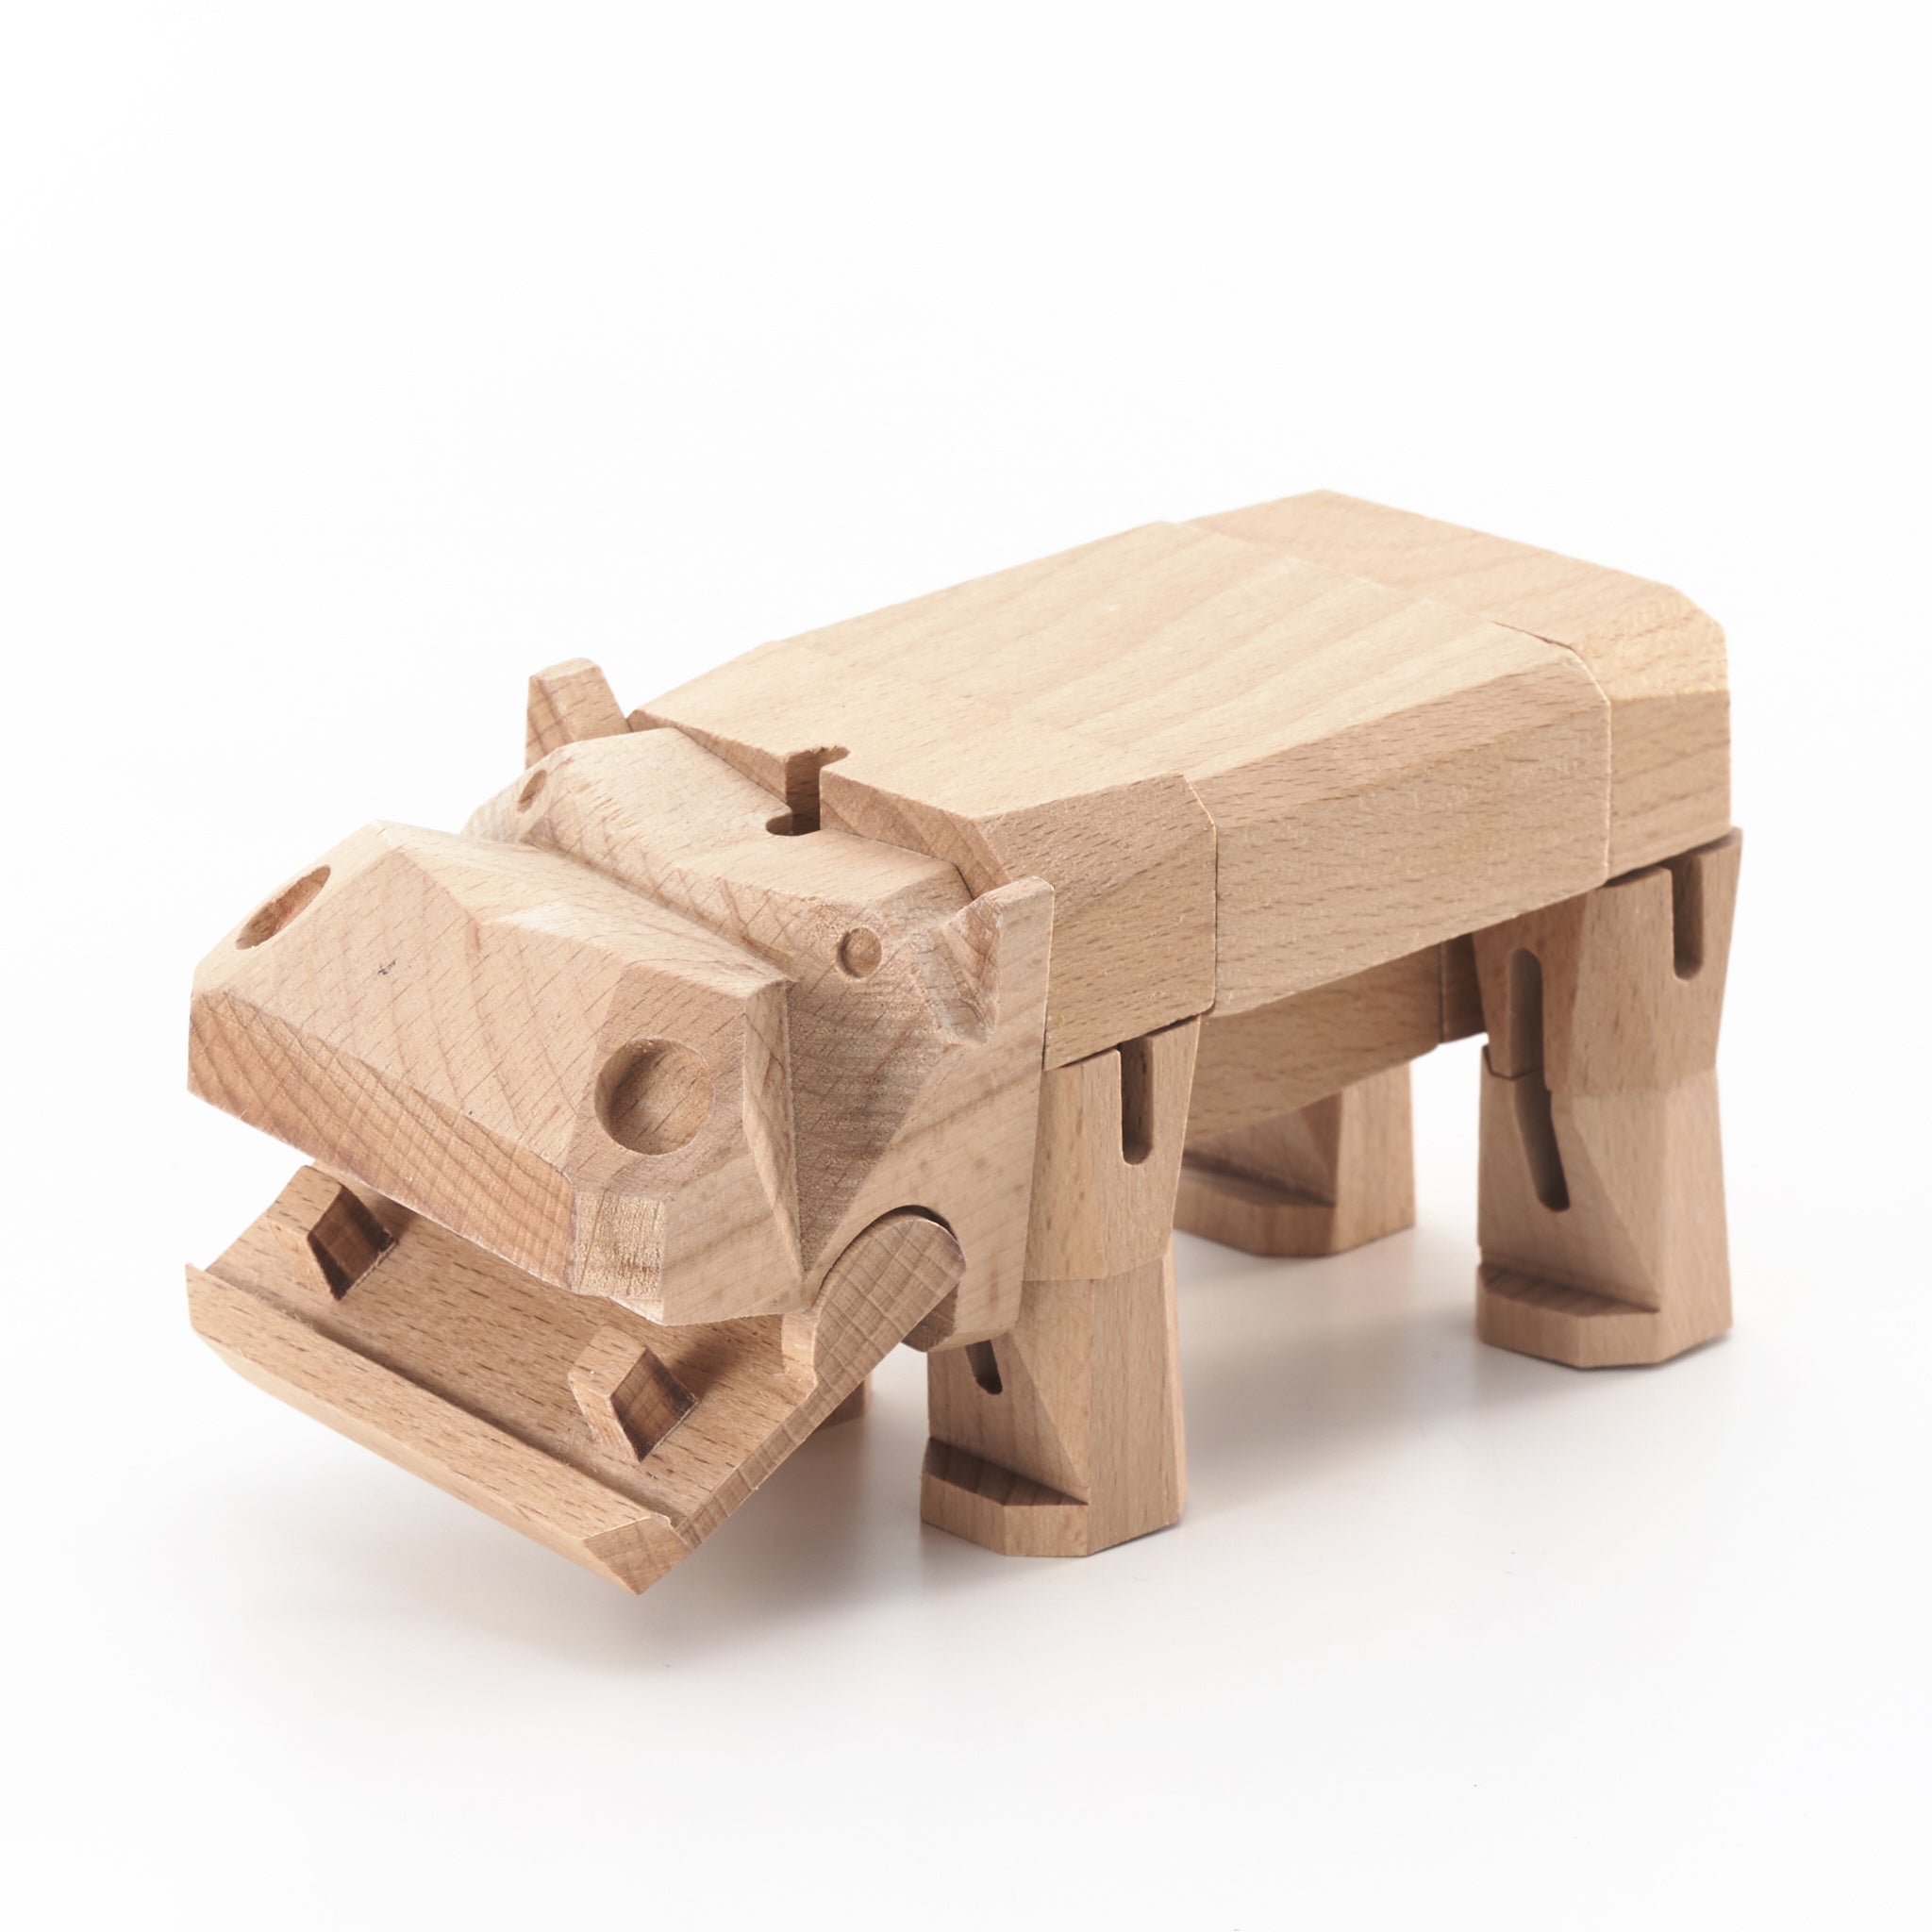 Morphits ® Hippo Wooden Toy Playset Puzzle Natural